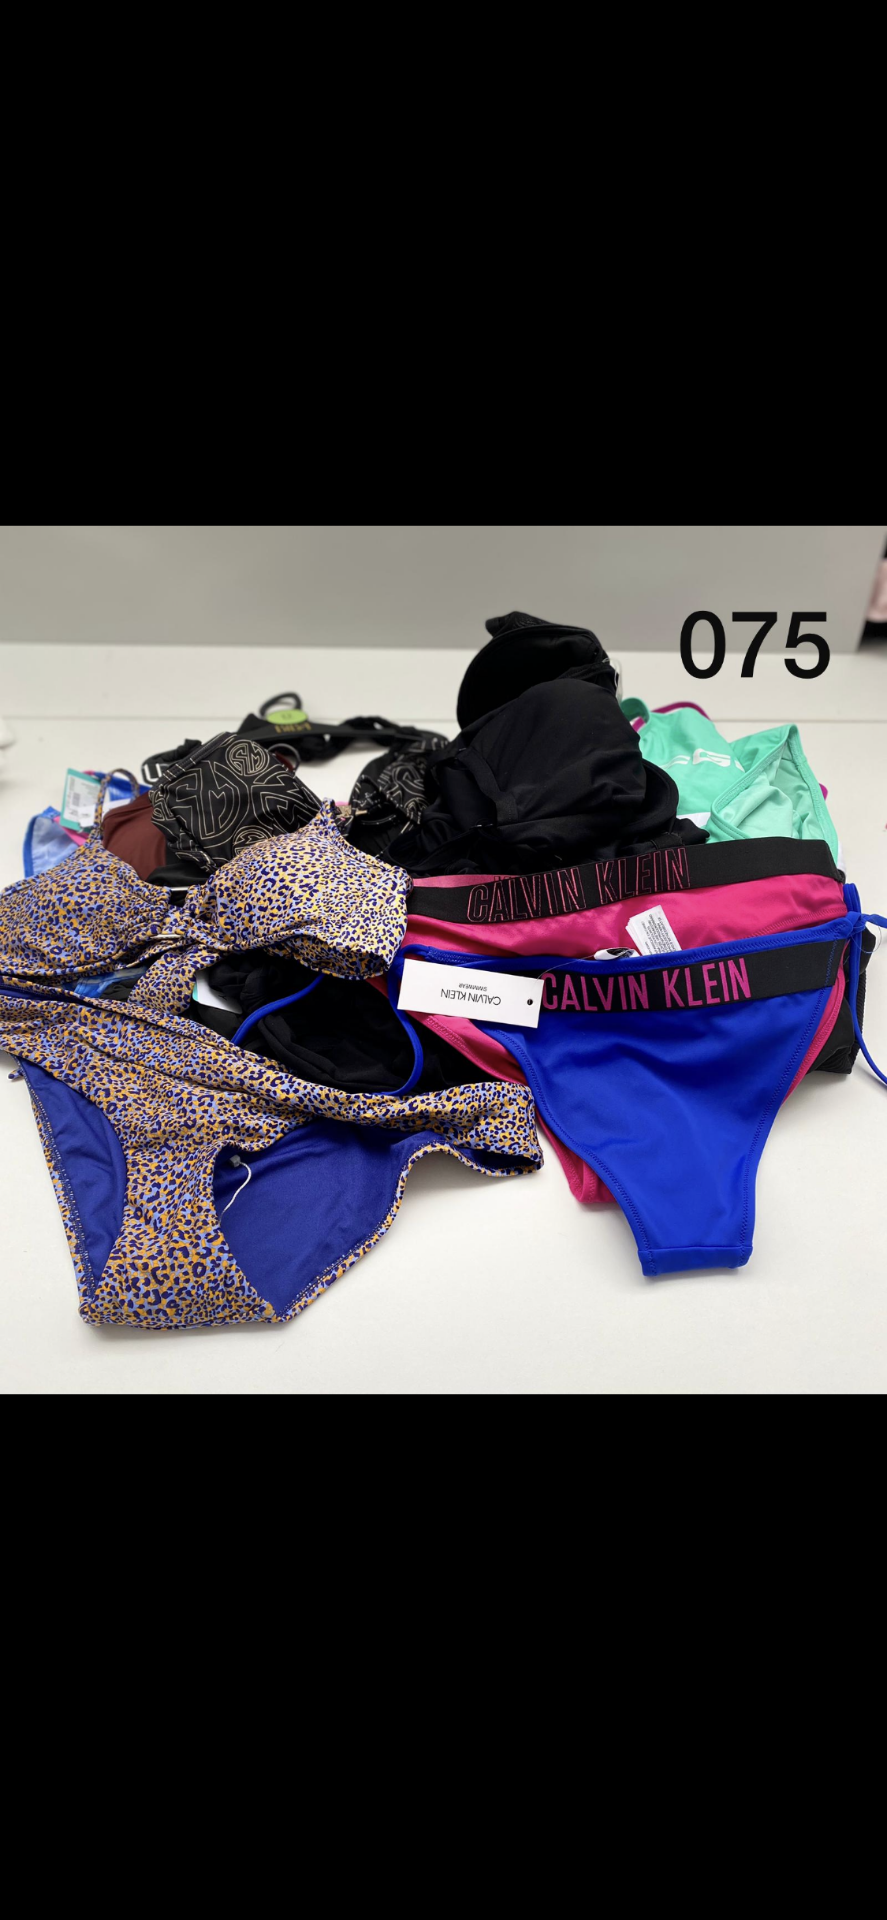 15 PIECE WOMENS SWIMWEAR LOT IN VARIOUS SIZES INCLUDING CALVIN KLEIN, SEAFOLLY AND ARENA RRP £290